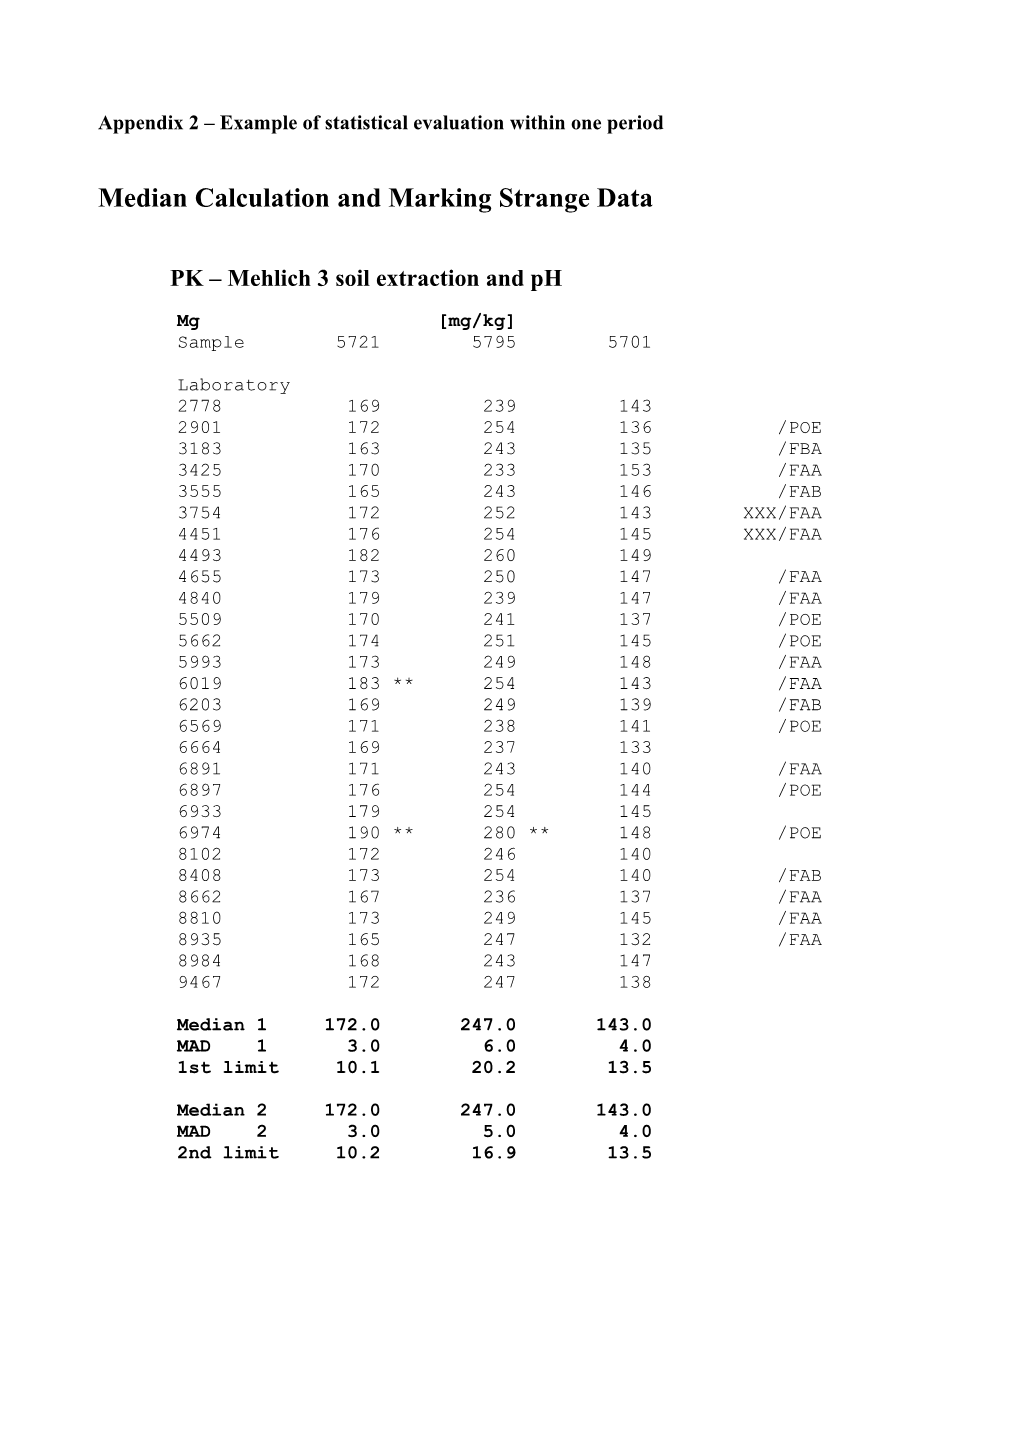 Appendix 2 Example of Statistical Evaluation Within One Period